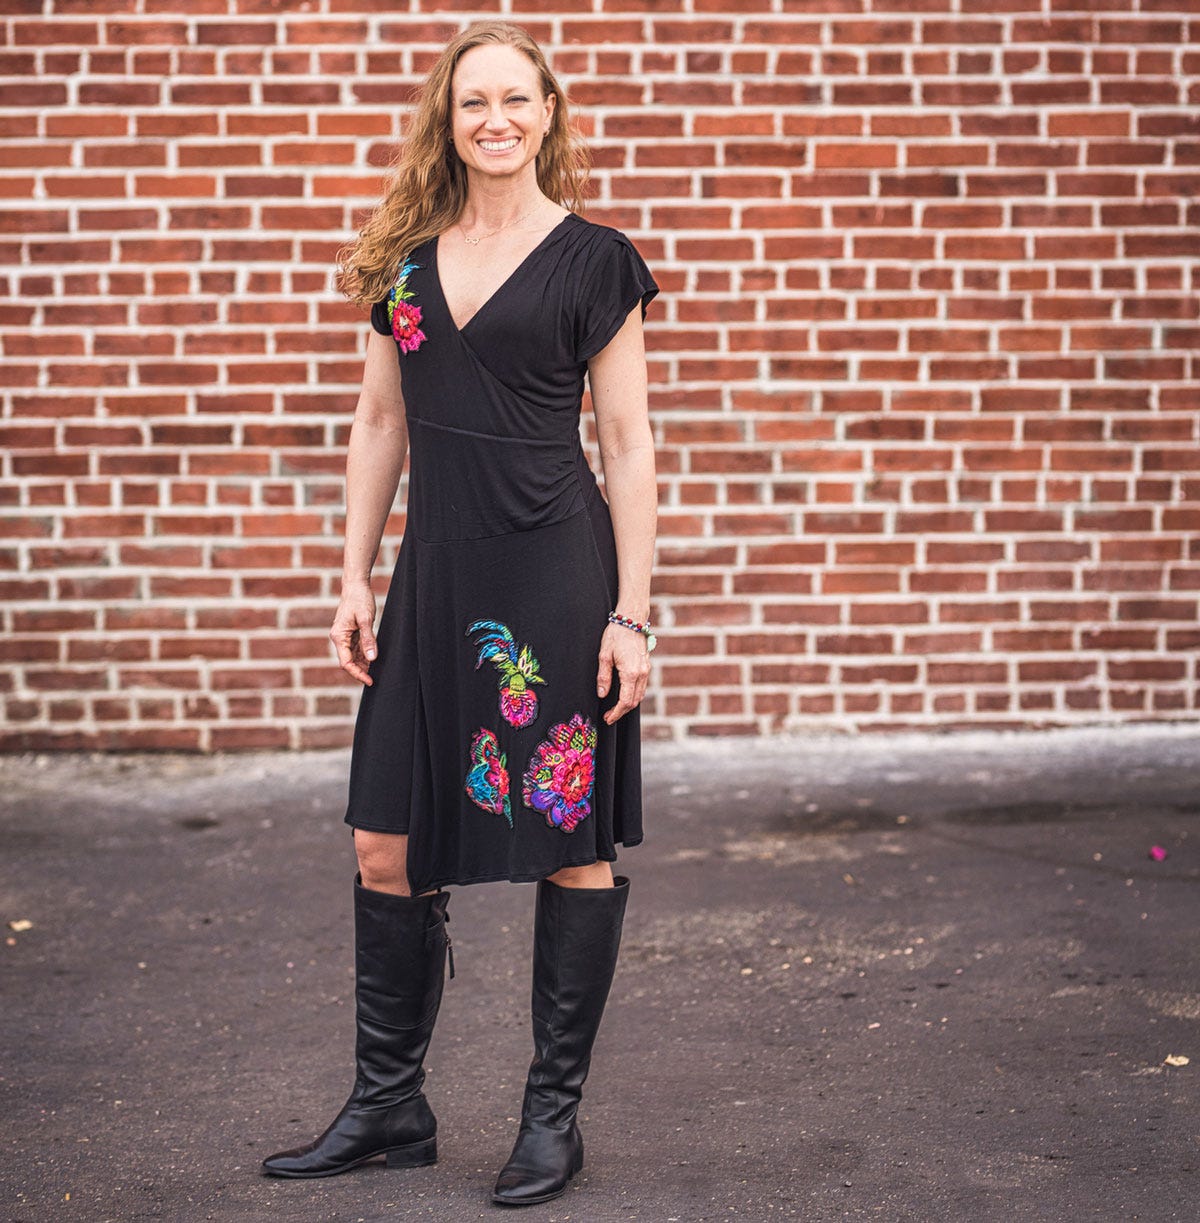 Meredith Miller: Brick Wall and Boots